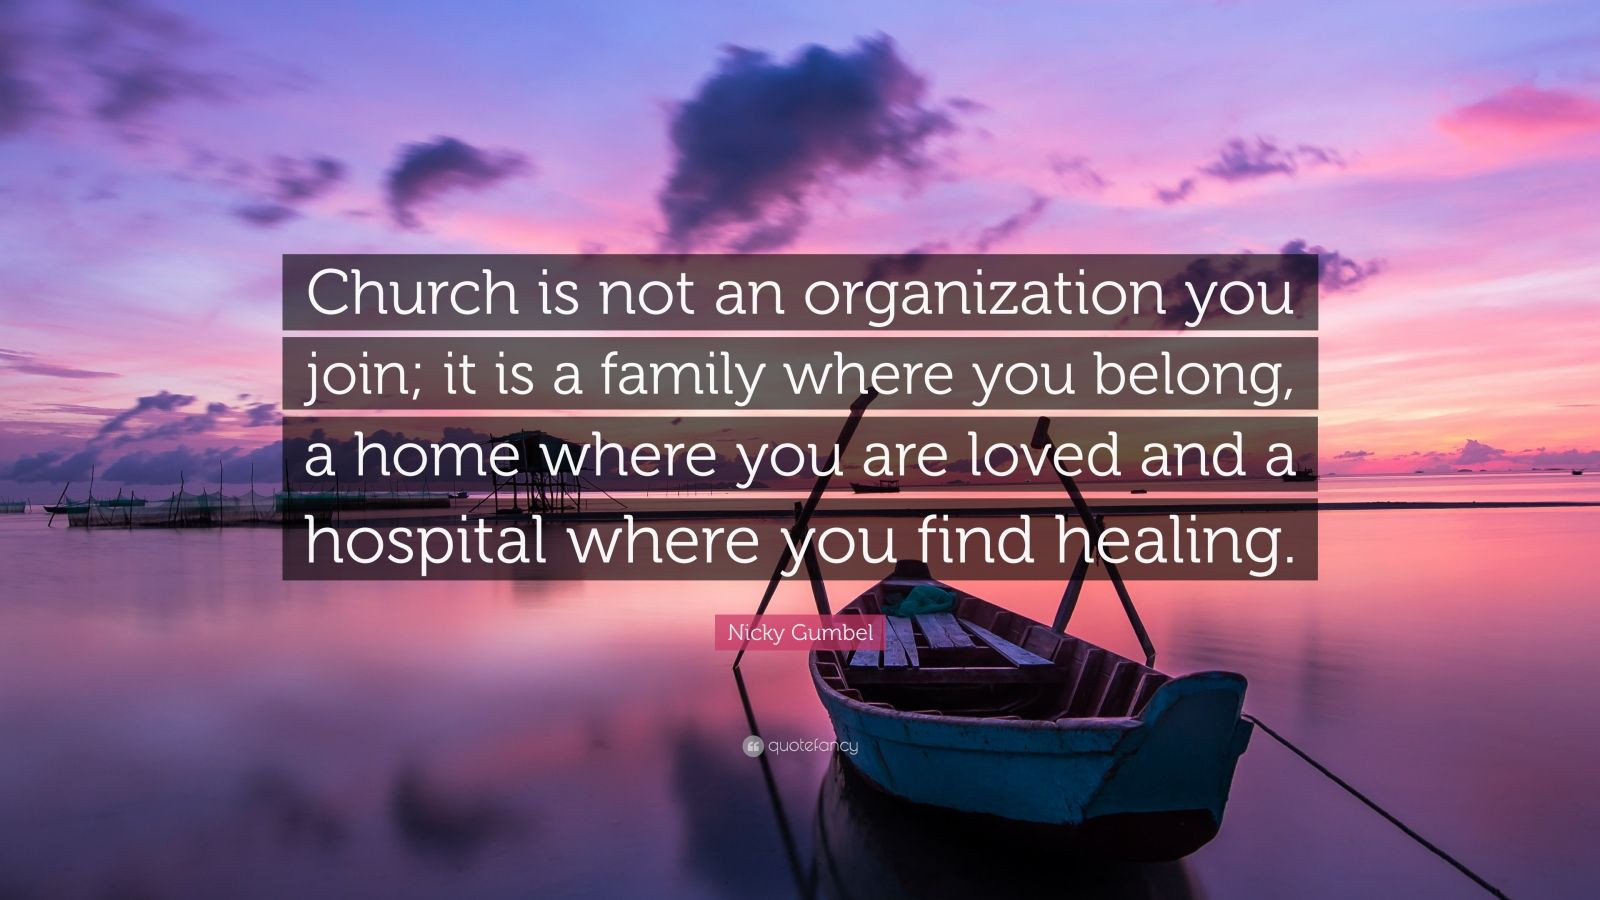 Church Family Quotes
 Nicky Gumbel Quote “Church is not an organization you